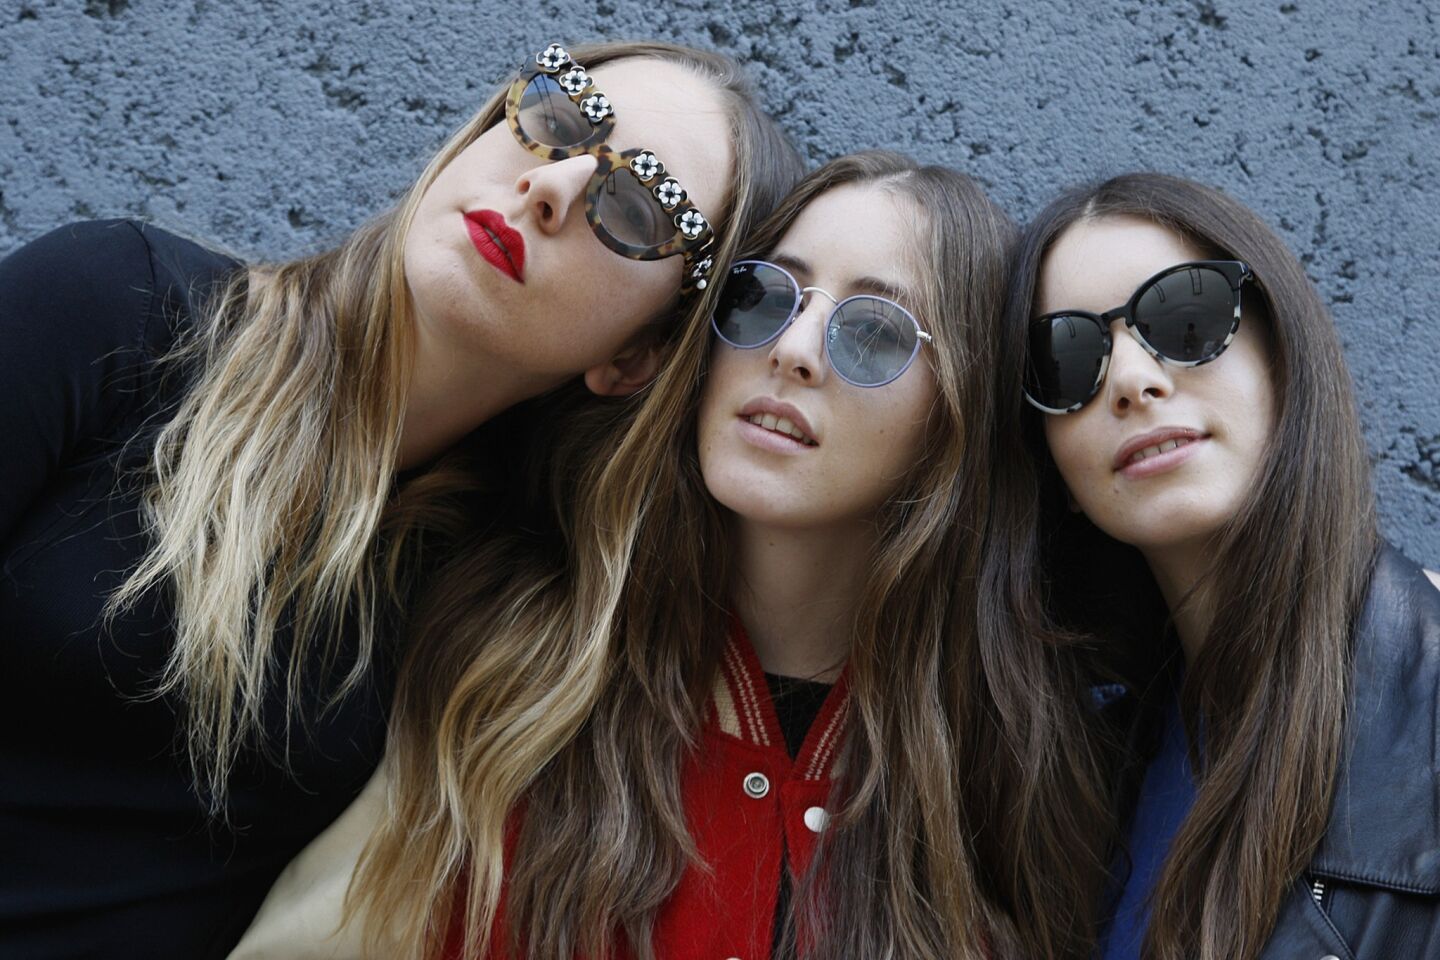 Este, from left, Alana and Danielle Haim of the group Haim before a concert at the Fonda Theatre in Hollywood.